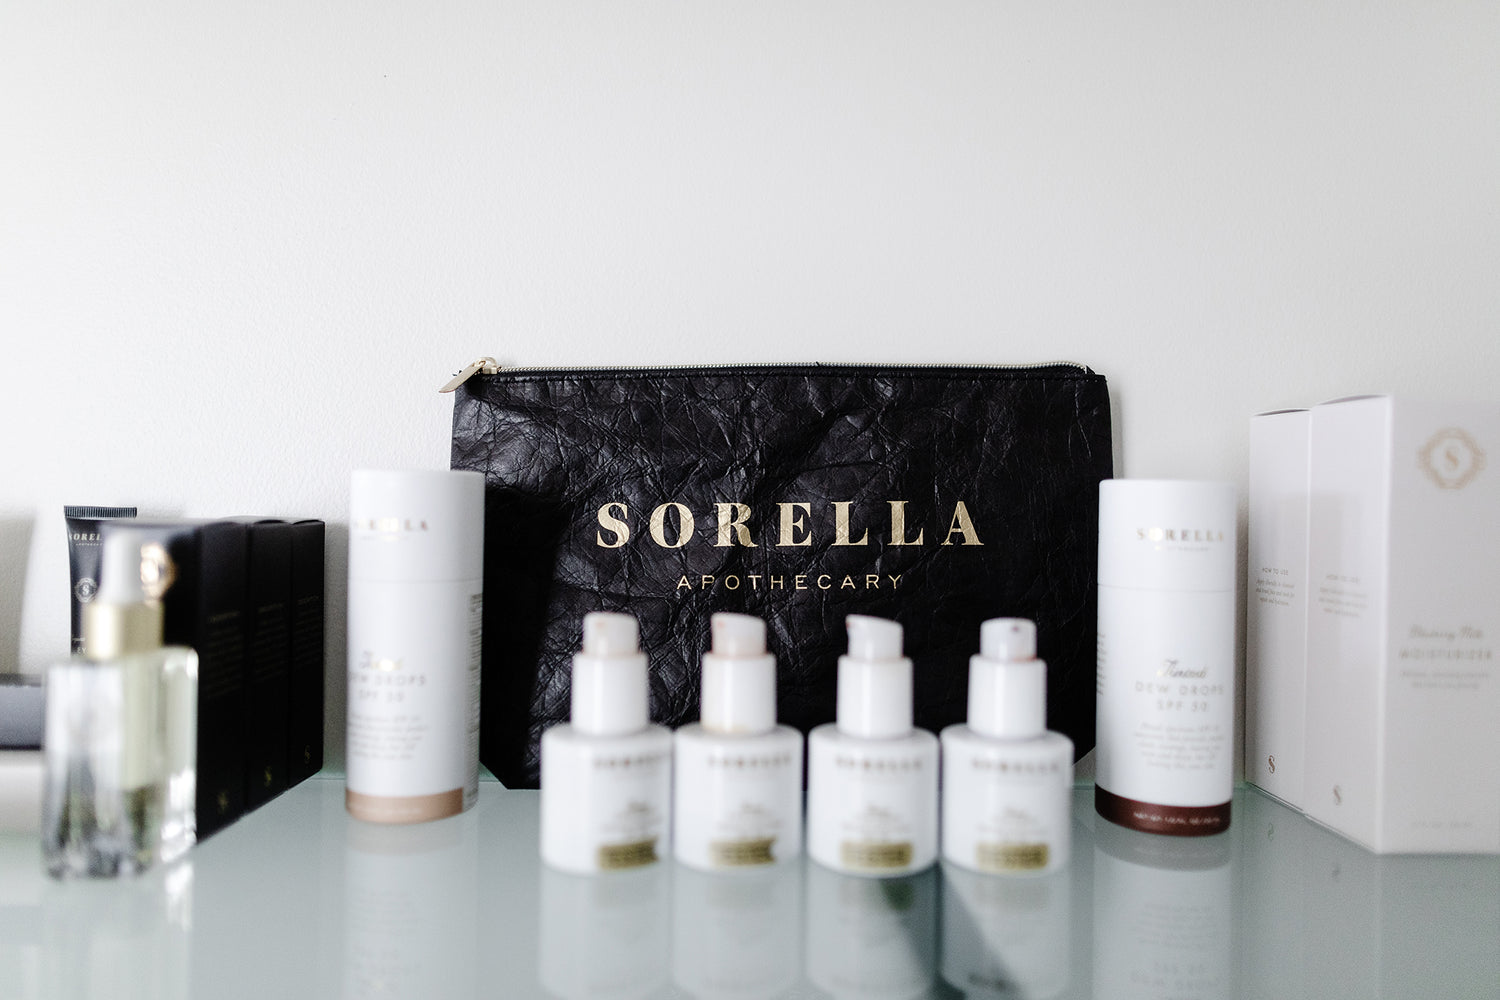 Products by Sorella